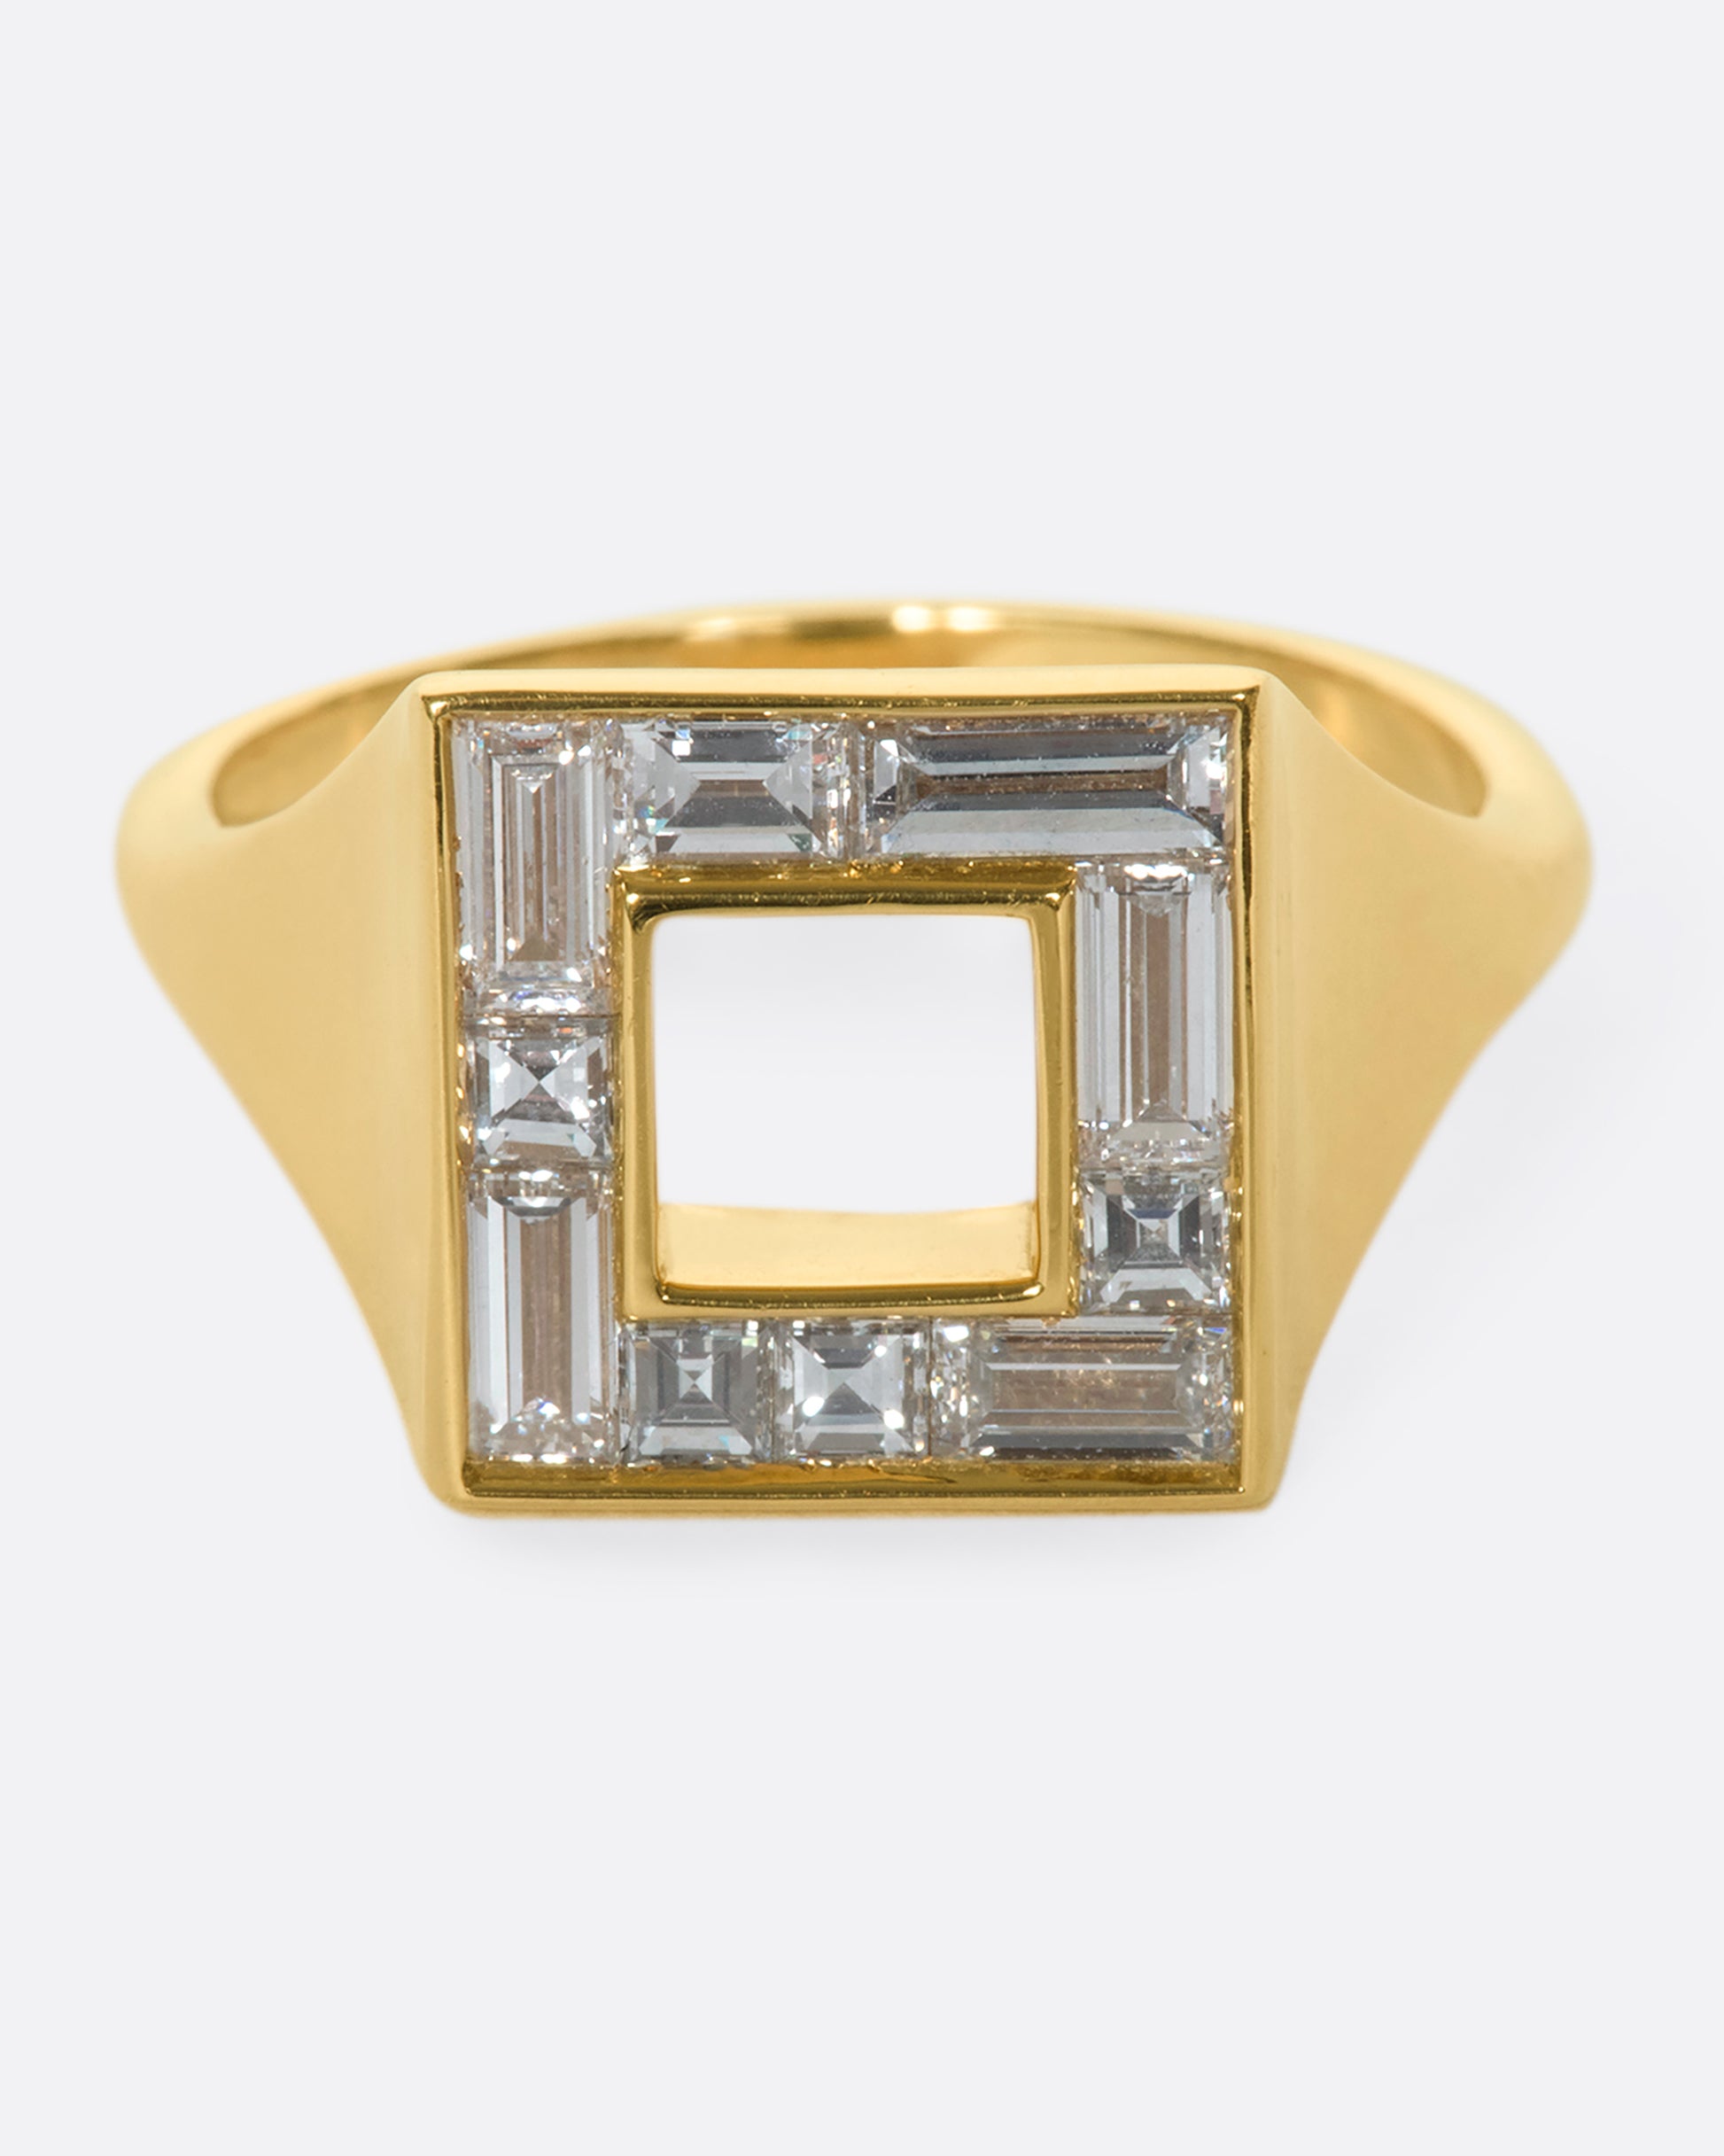 A photo of a square ring set with baguette diamonds.